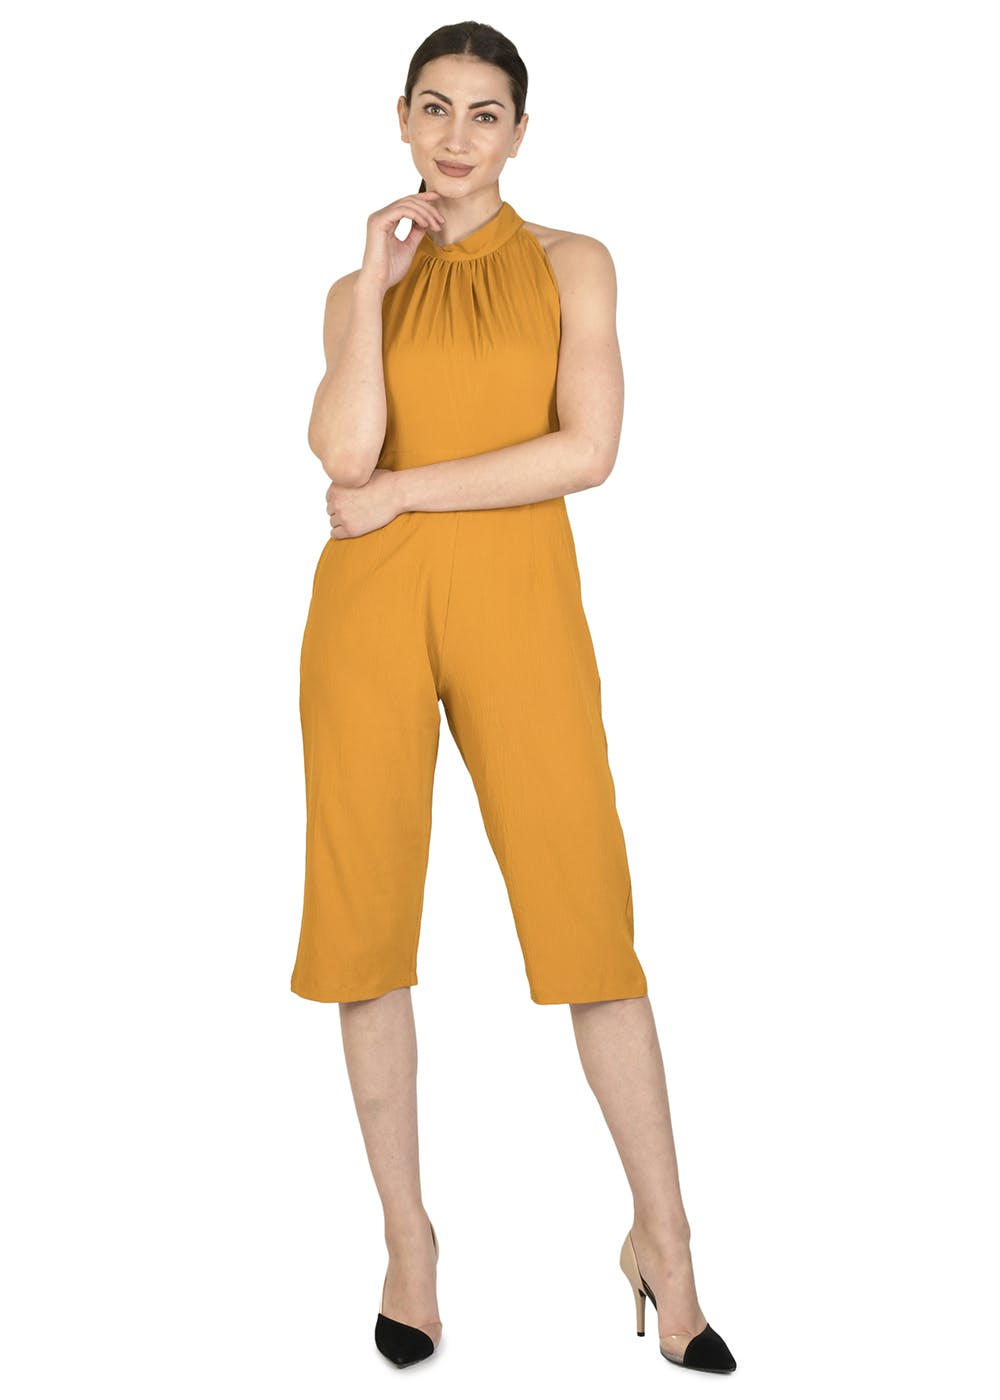 Discover 85+ knee high jumpsuits super hot